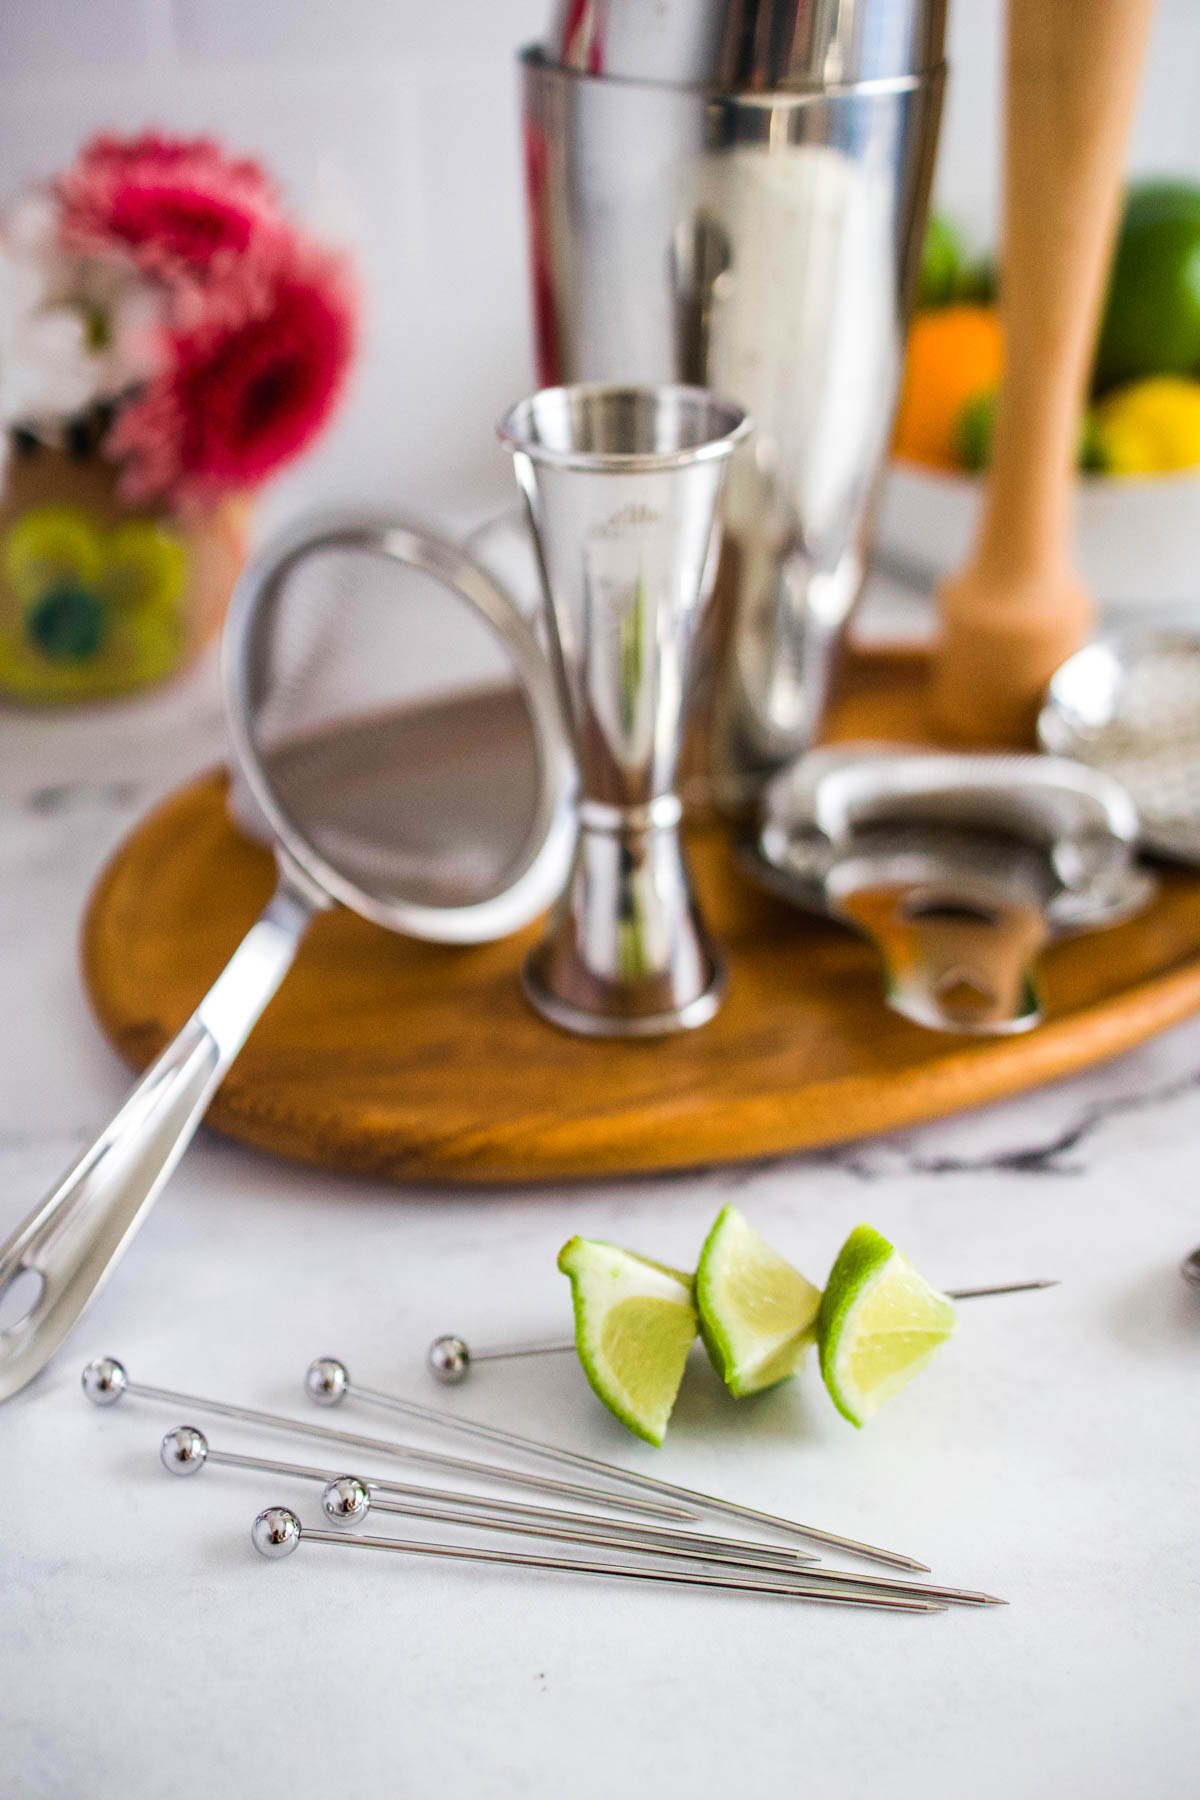 A fine mesh strainer next to stainless steel cocktail picks with lime chunks on them and a tray with other cocktail tools.